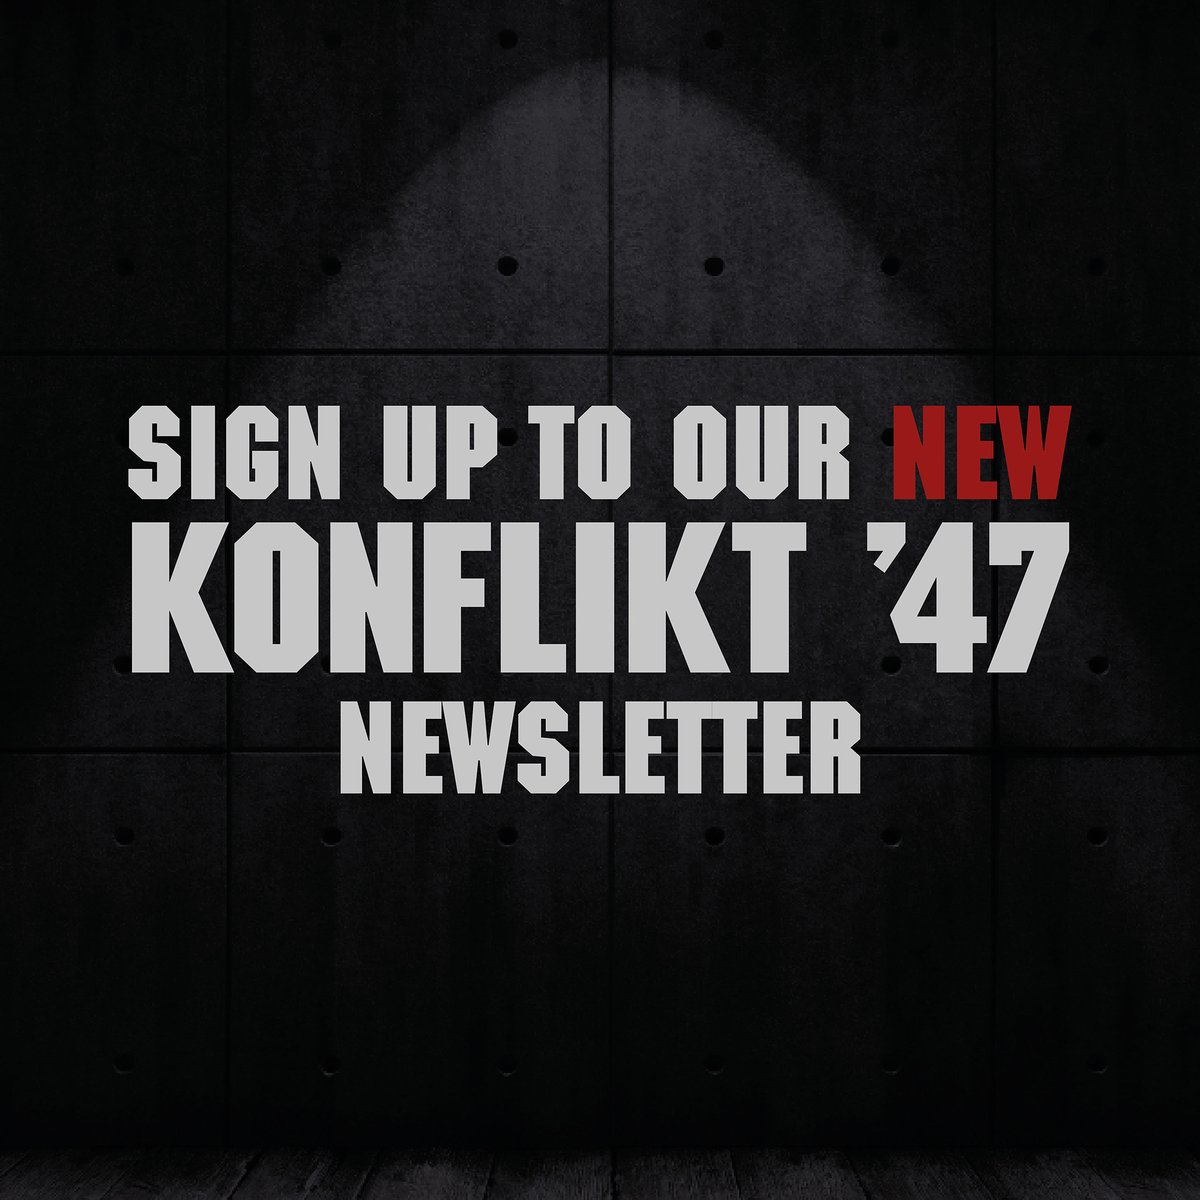 Ever since we acquired Konflikt '47, we've been hard at work developing the game and universe. We're delighted to announce that the legendary Andy Chambers will be heading up the writing and development team!

Sign up for our Konflikt '47 newsletter! bit.ly/44UhfZK